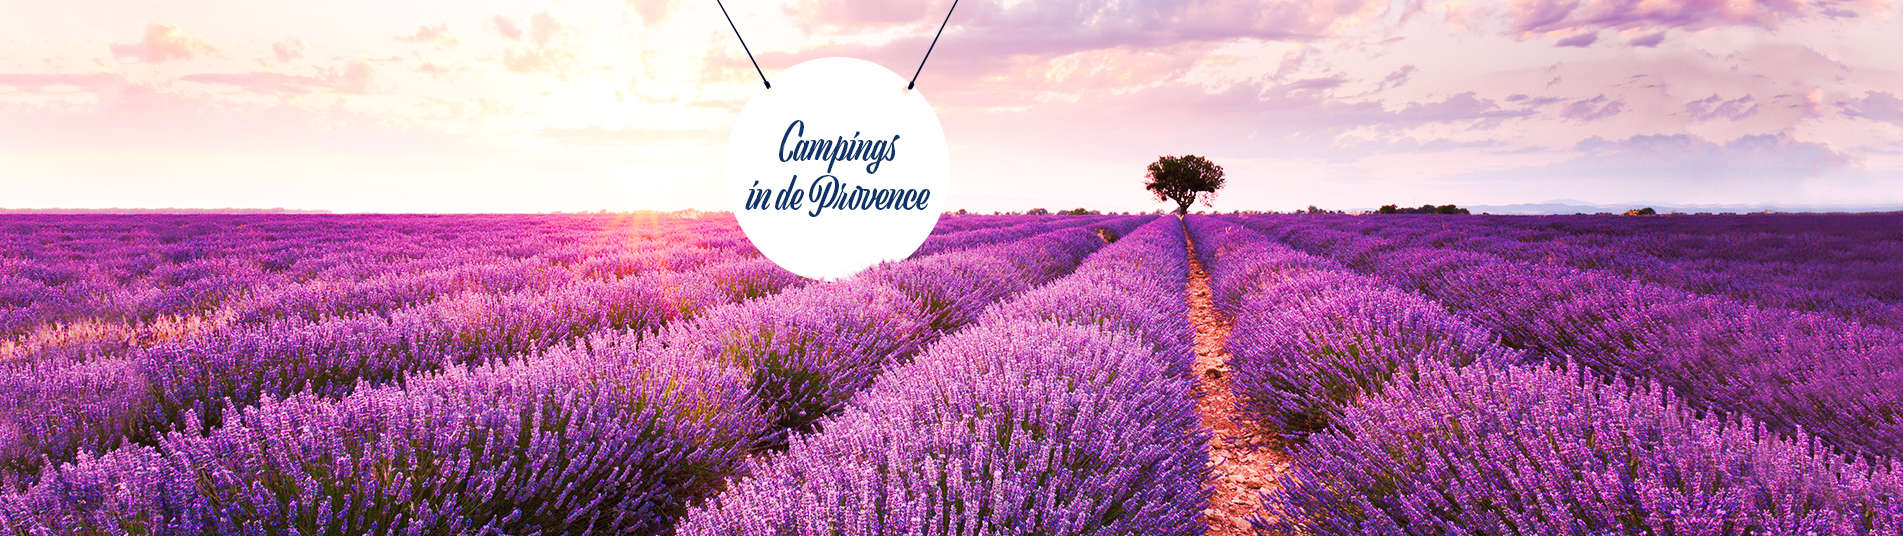 Camping in de Provence